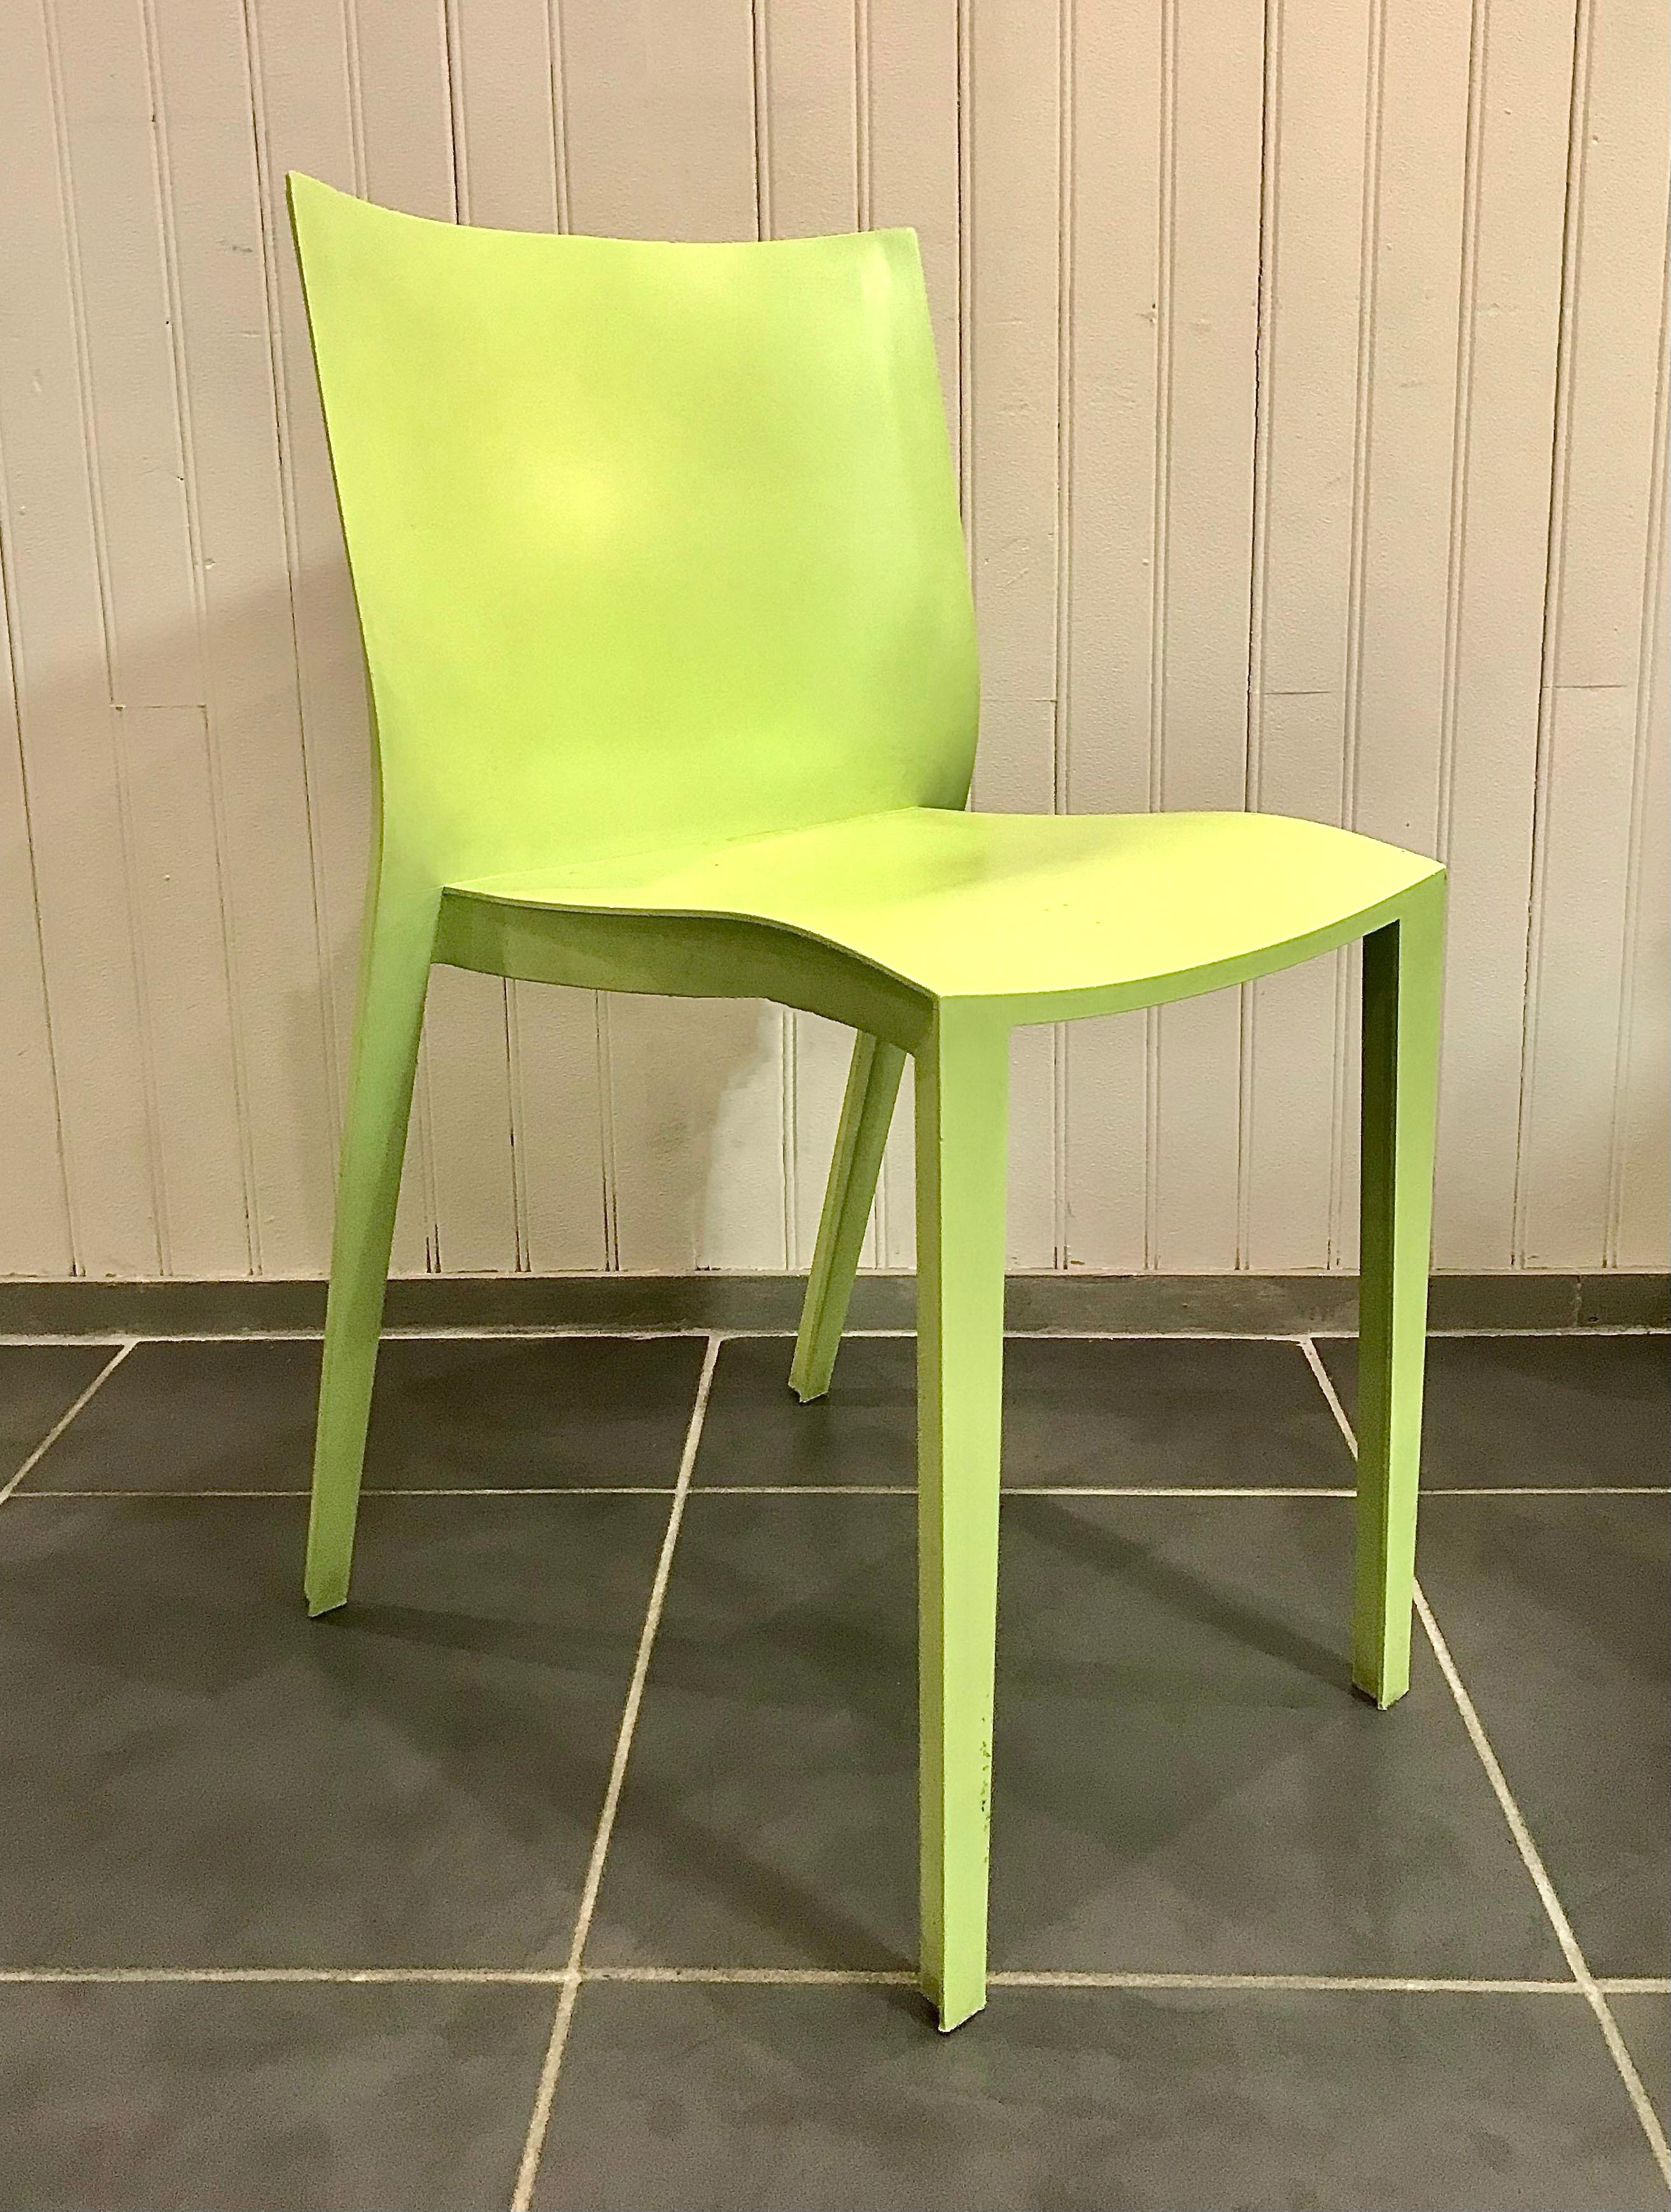 Set of 7 designer chairs by Philippe Starck, named Slick Slick XO. 

Slick Slick is the chair at its most essential. It is emblematic of Starck's creativity and vision. He wants to offer the right product at the right price. This chair is very